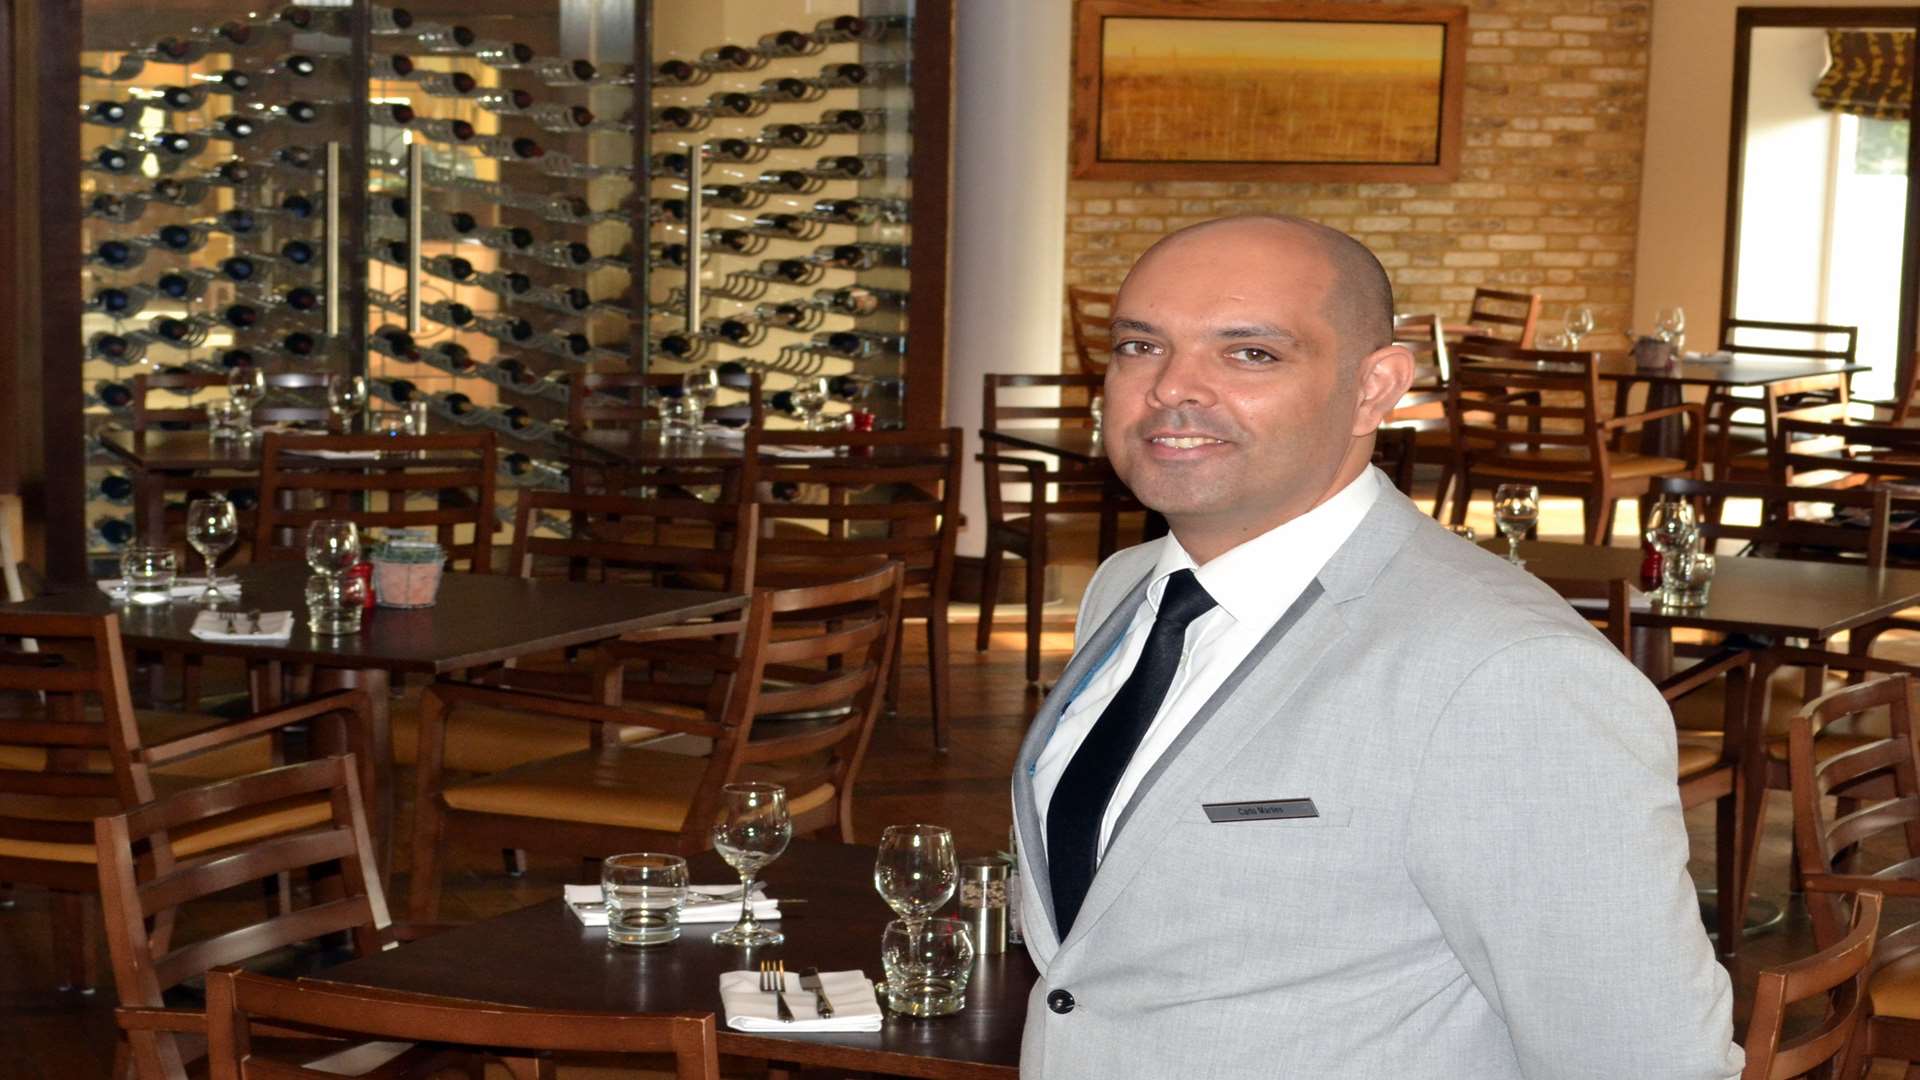 Carlo Martins, new bar manager at the Tudor Park Marriott Hotel in Maidstone